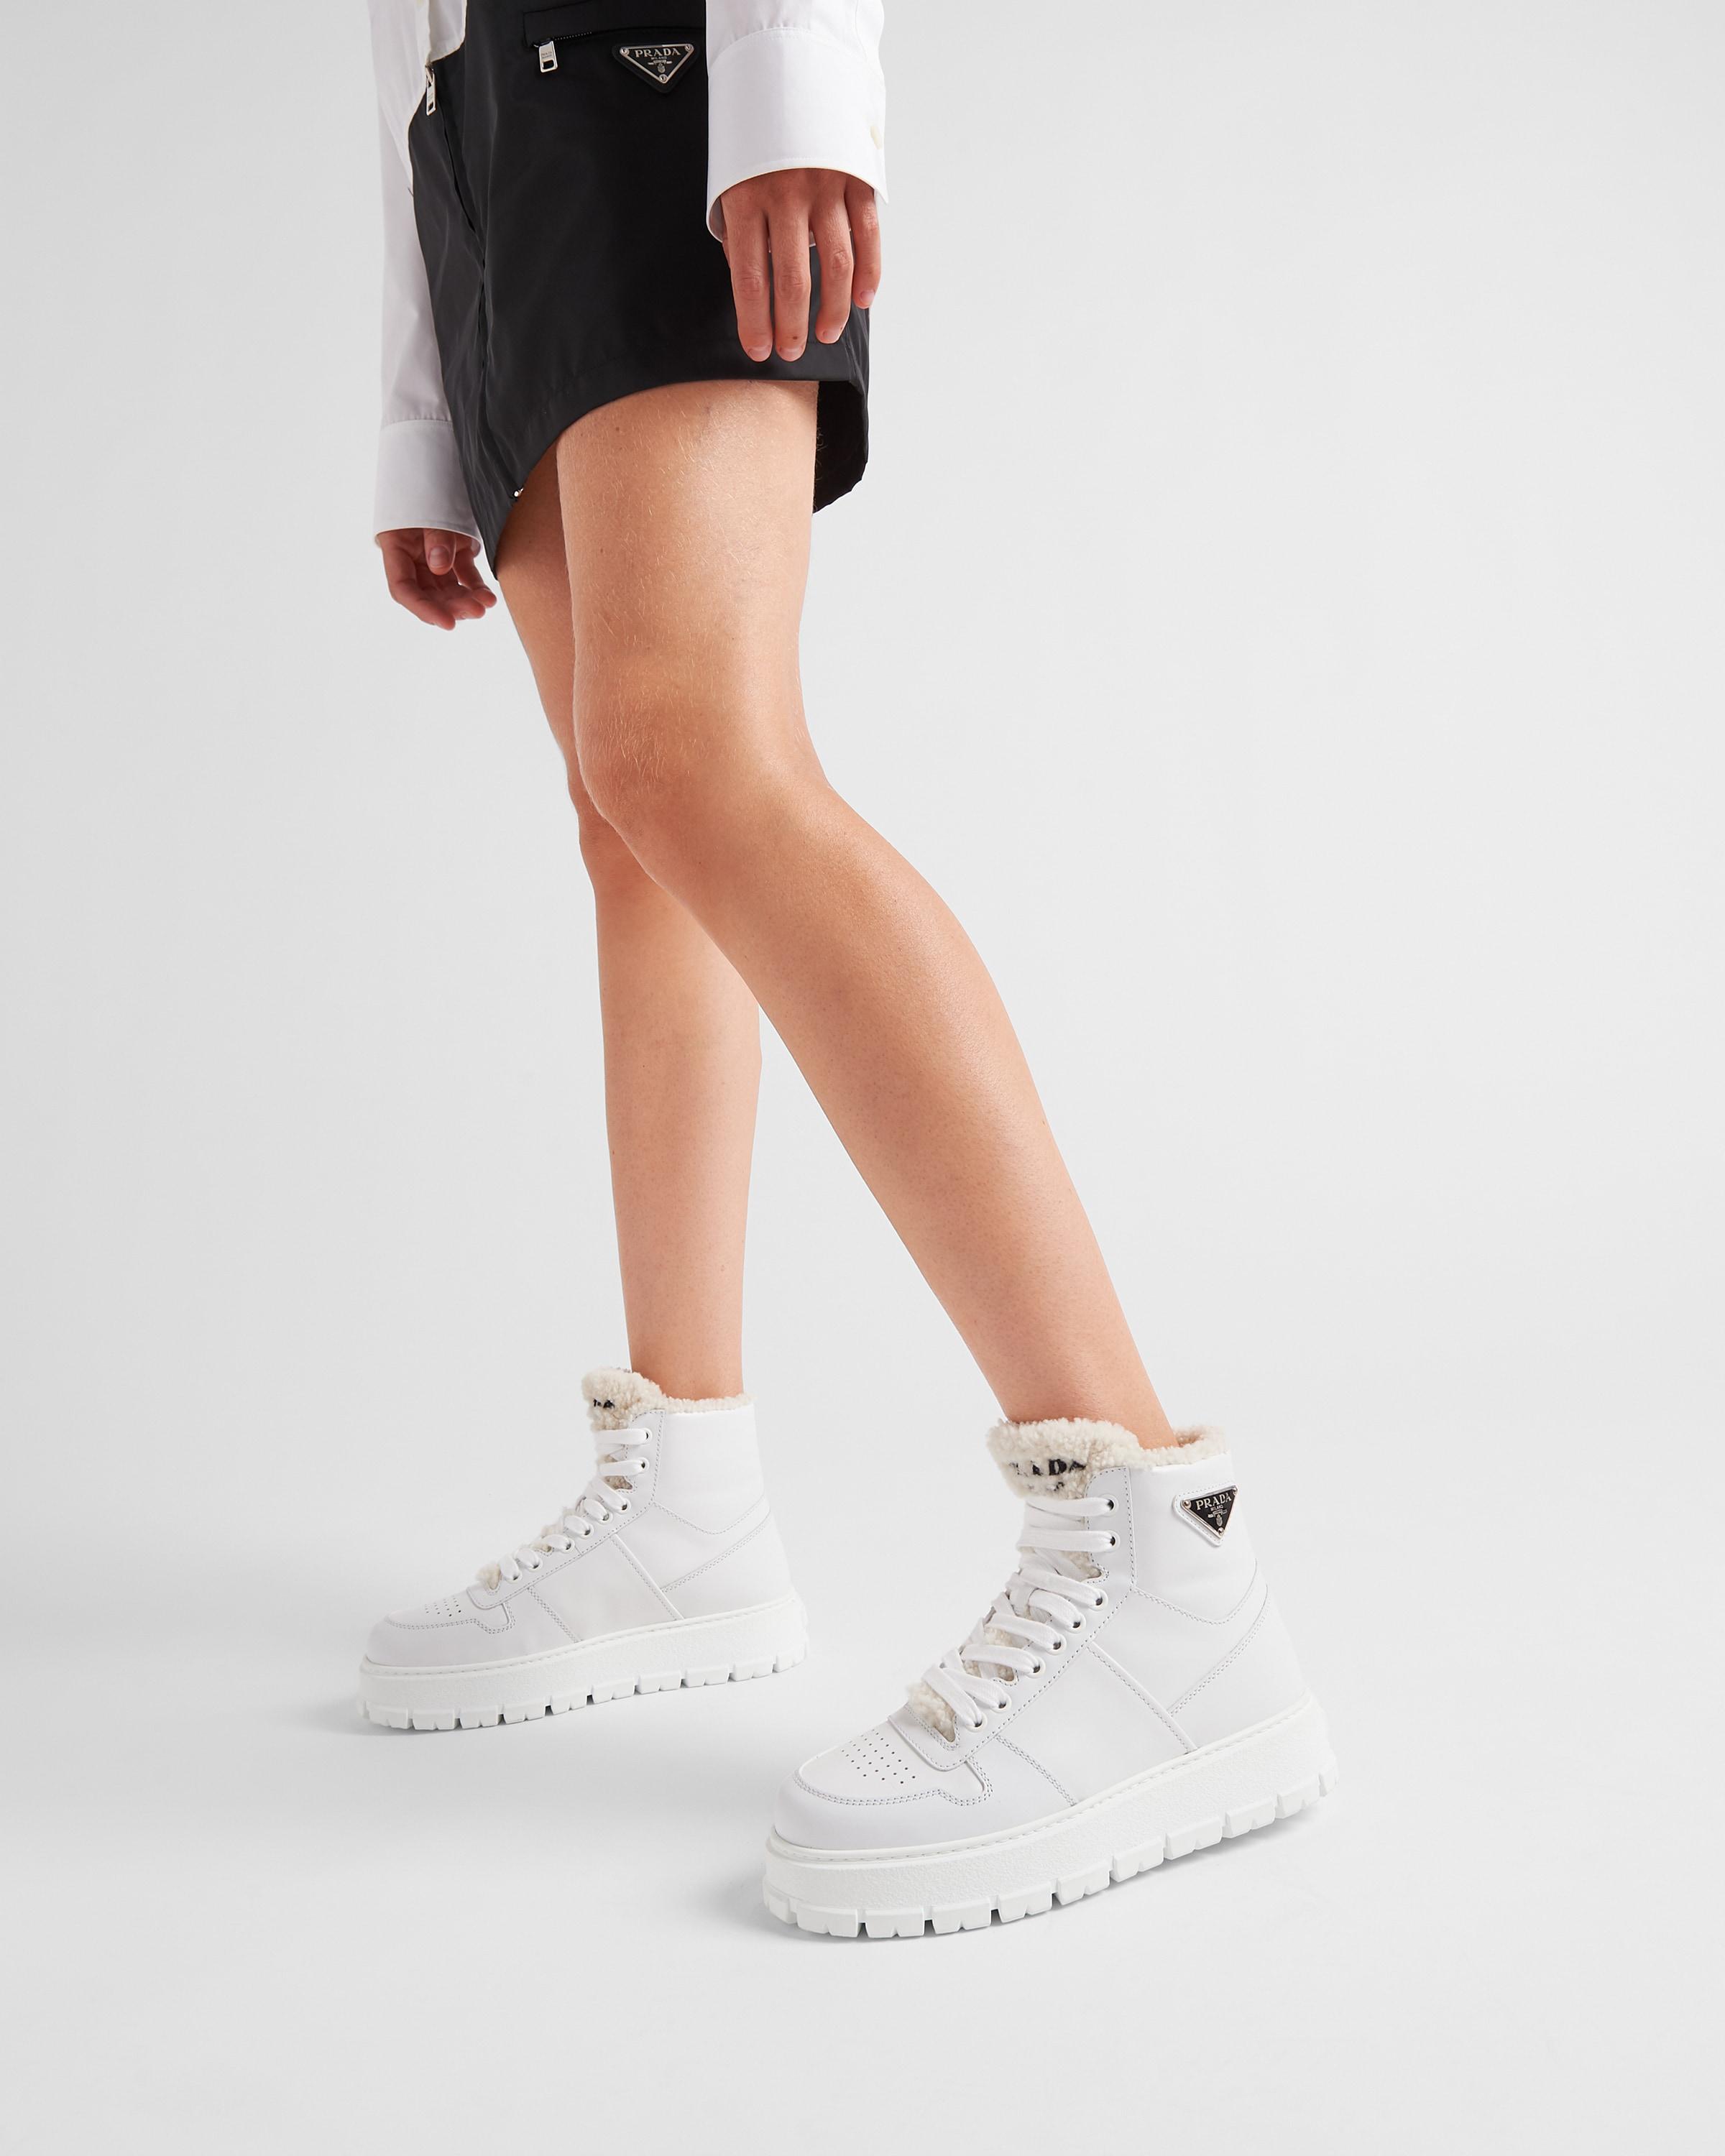 Prada Leather And Shearling High-top Sneakers in White | Lyst